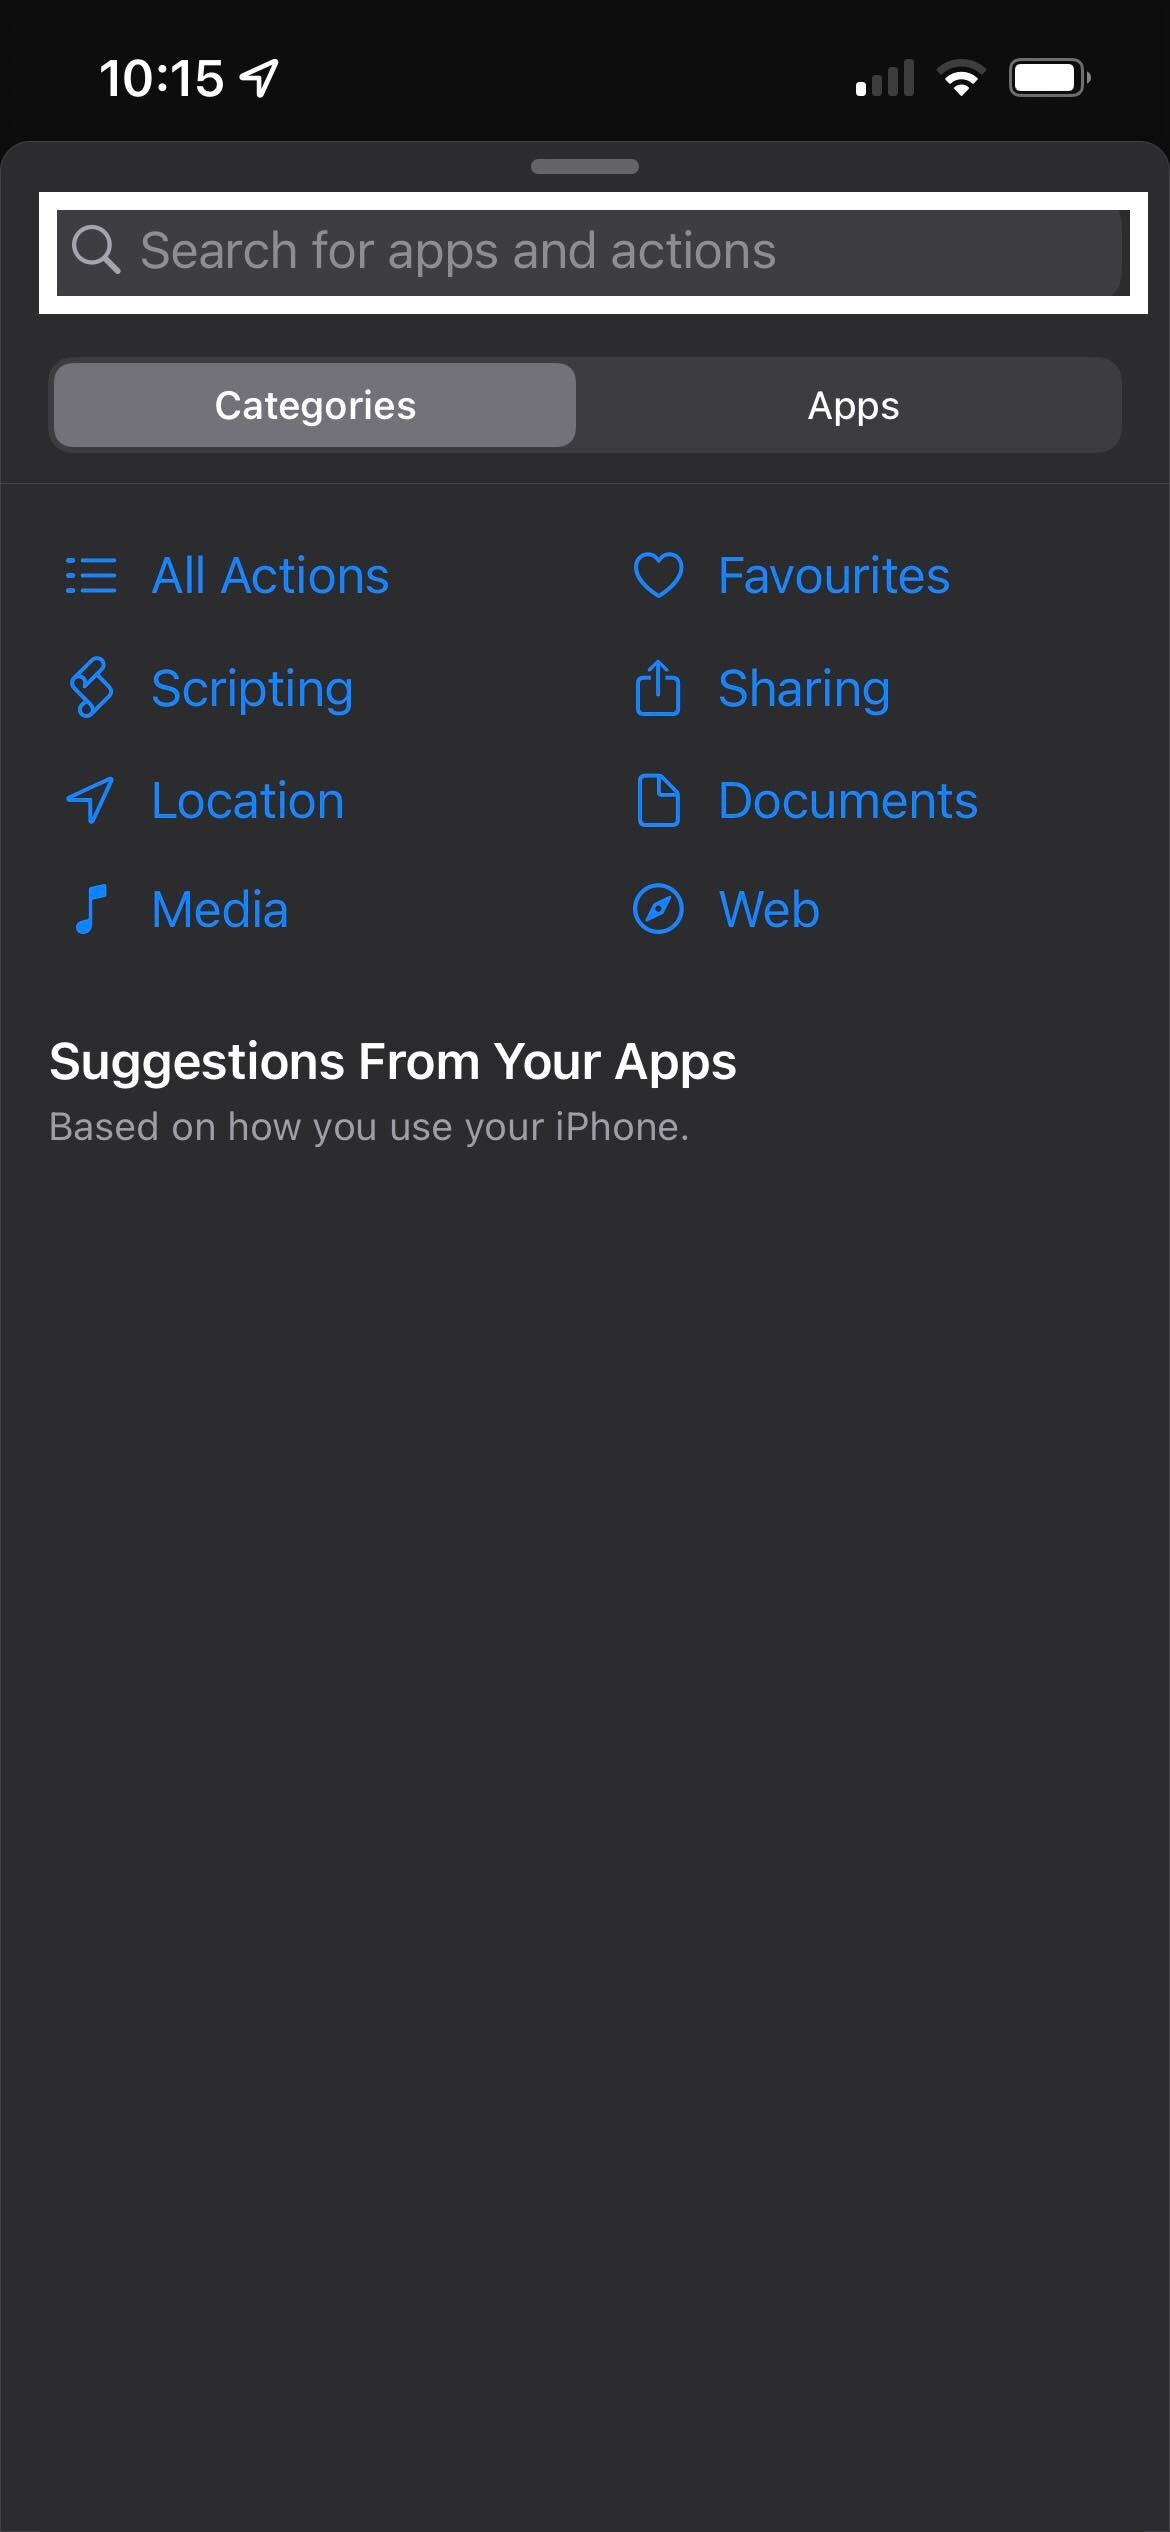 The search bar option in iOS